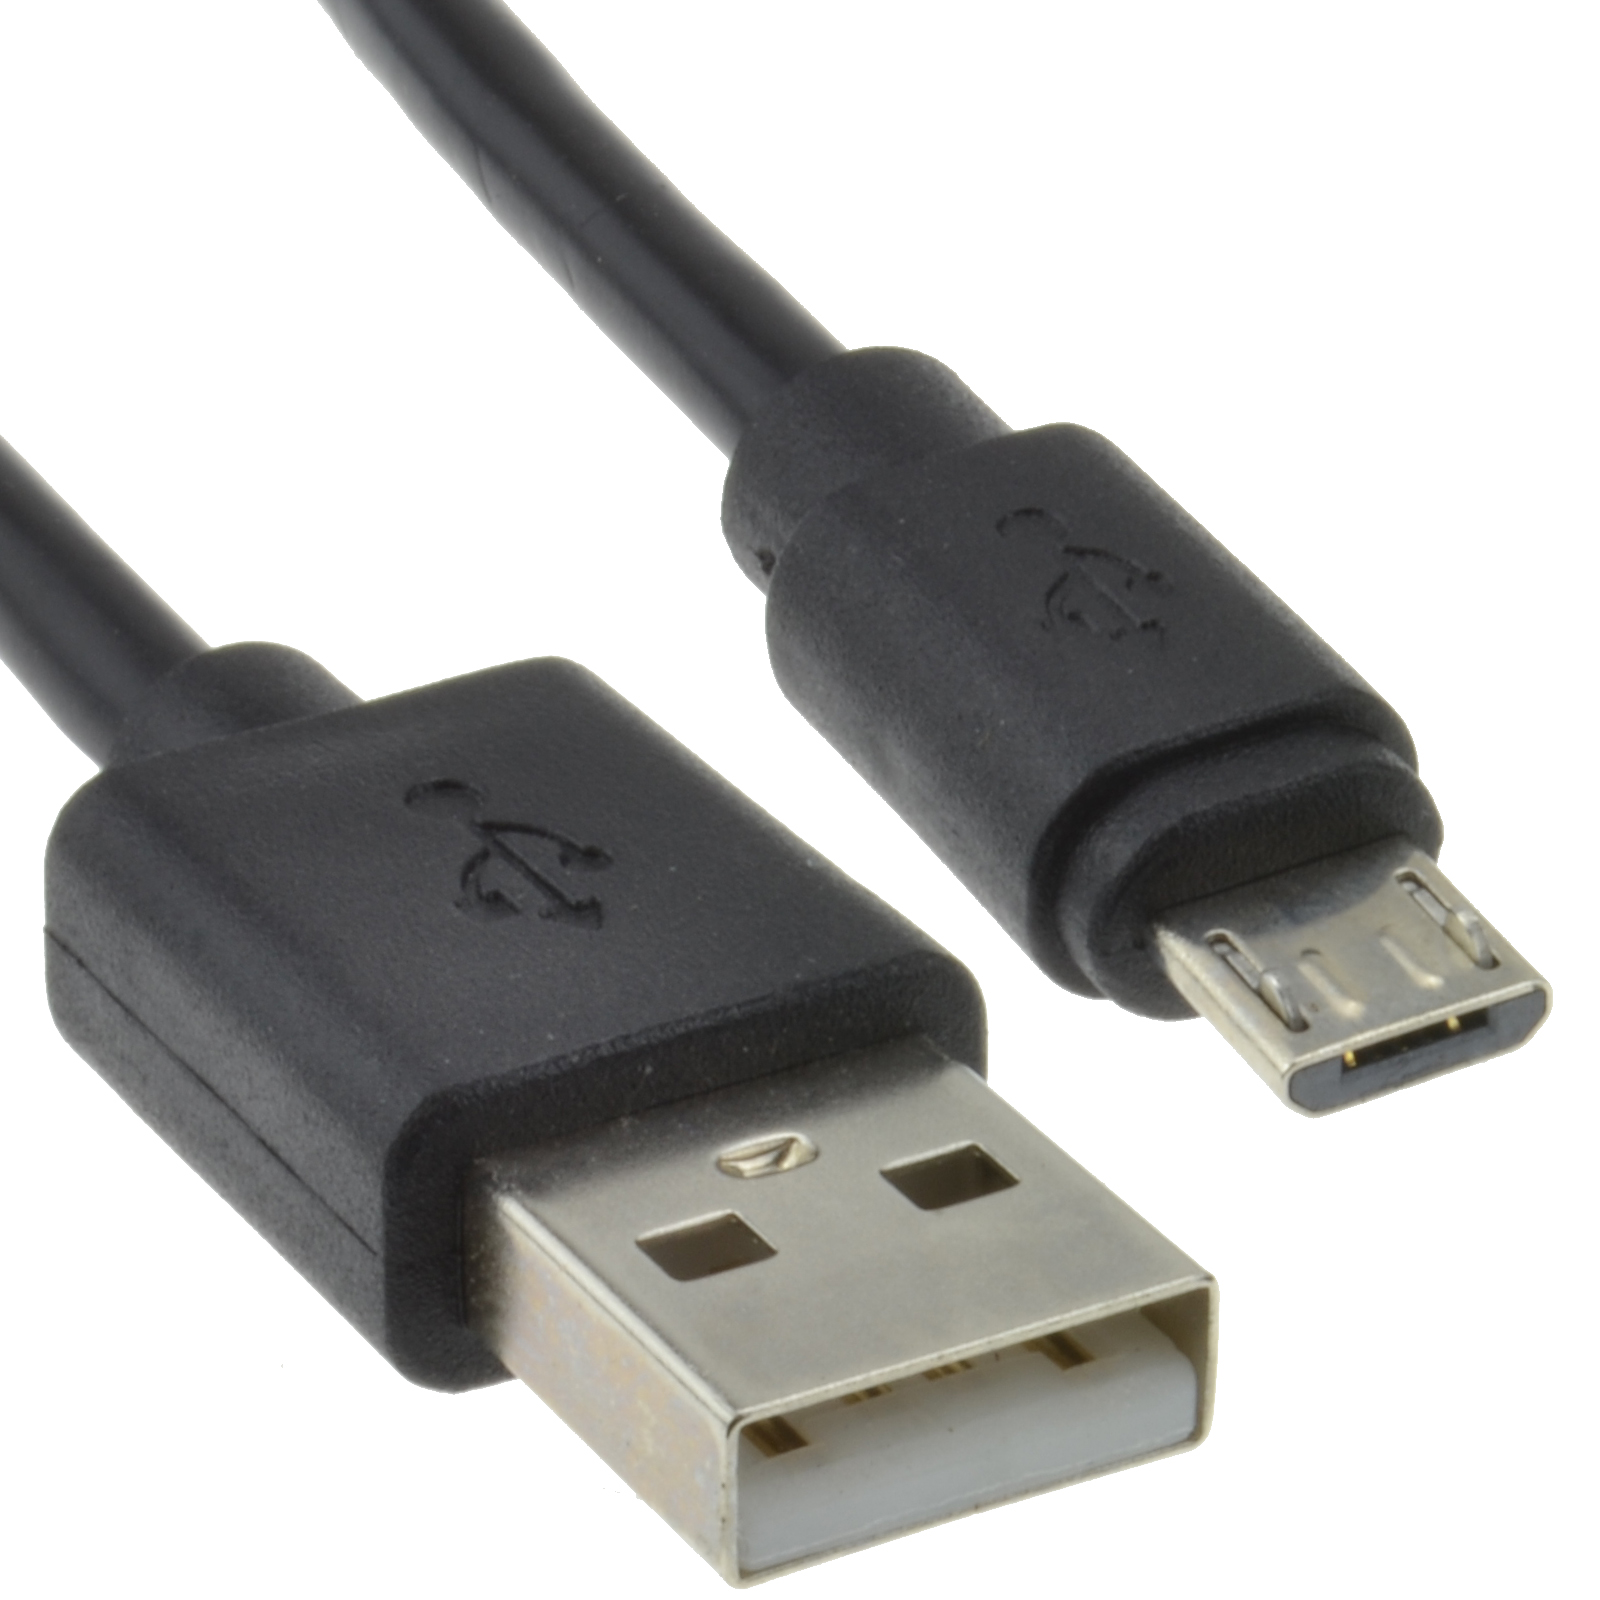 Usb cable photo